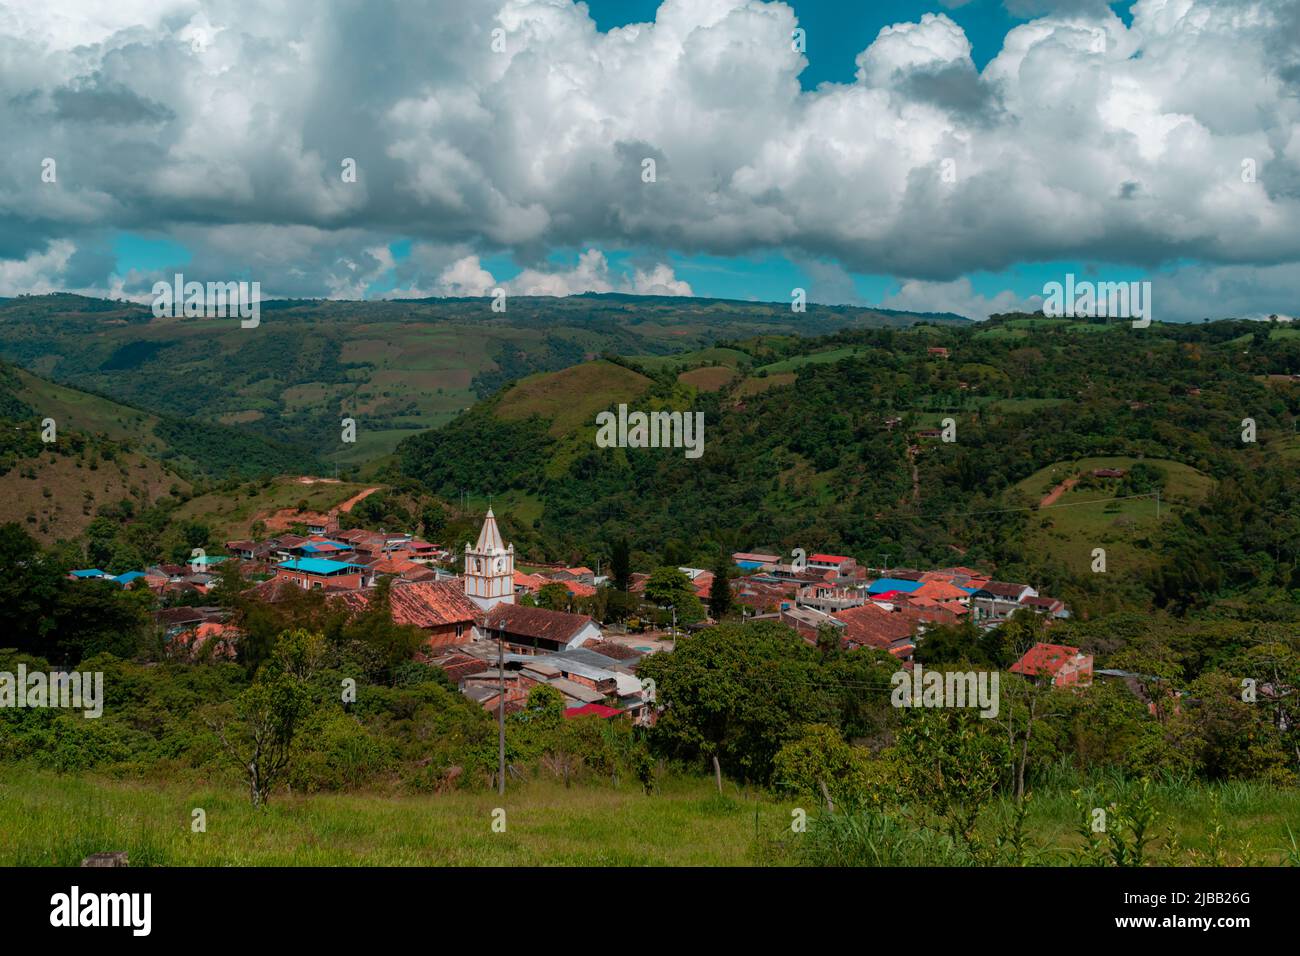 landscape of the municipality of ocamonte in colombia with a view of the church tower and mountains in the background Stock Photo